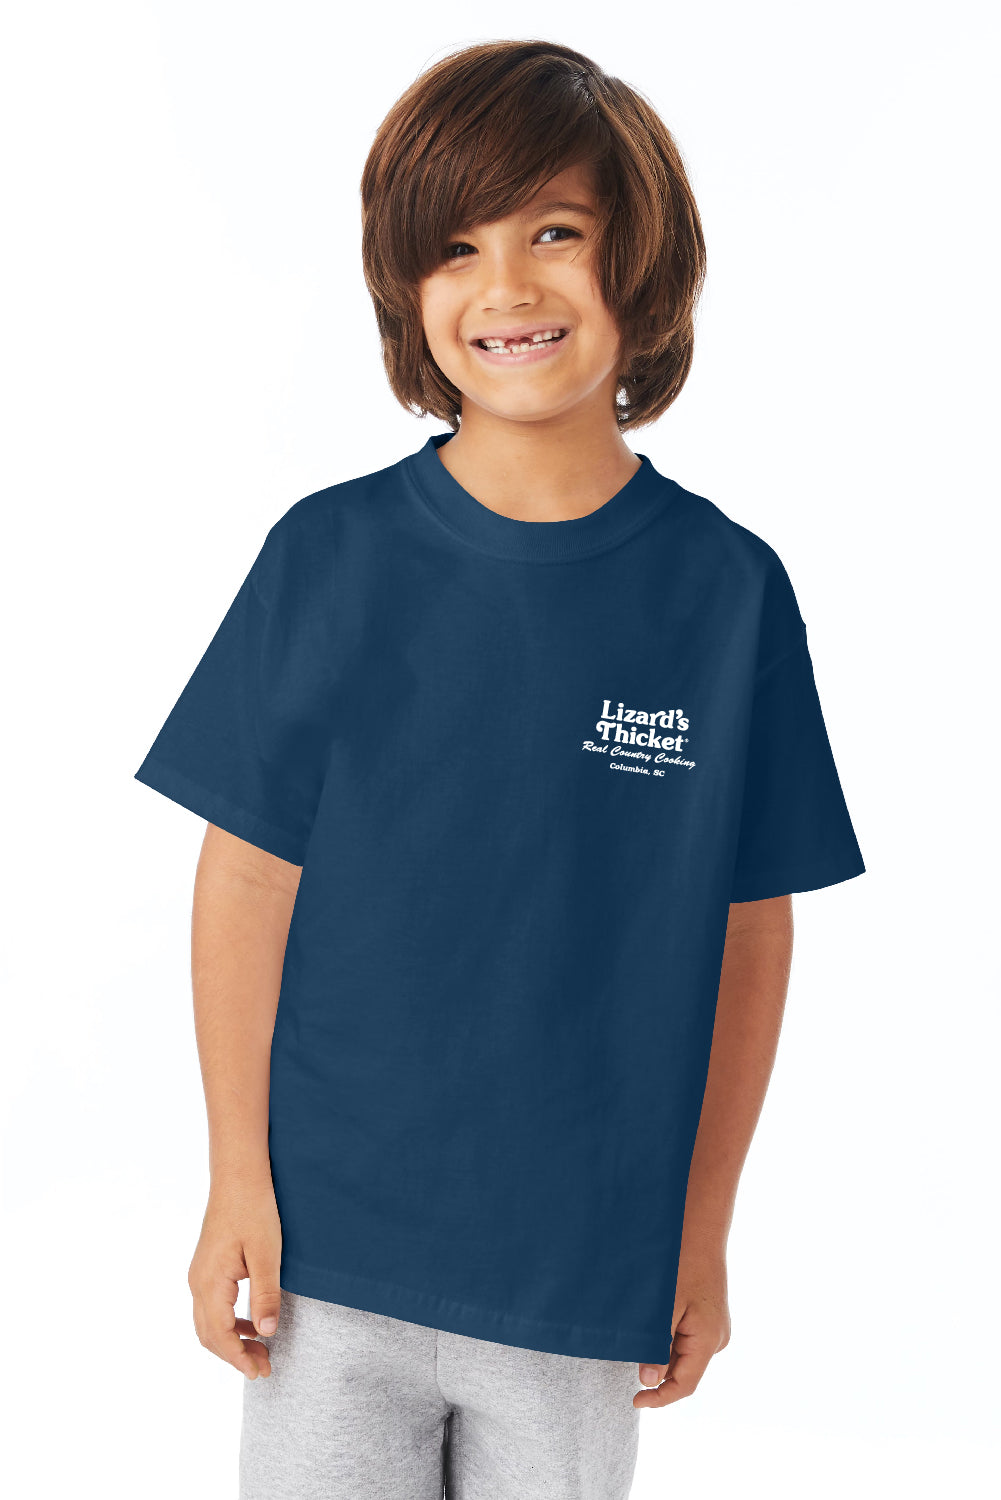 Lizard’s Thicket Youth T-Shirt